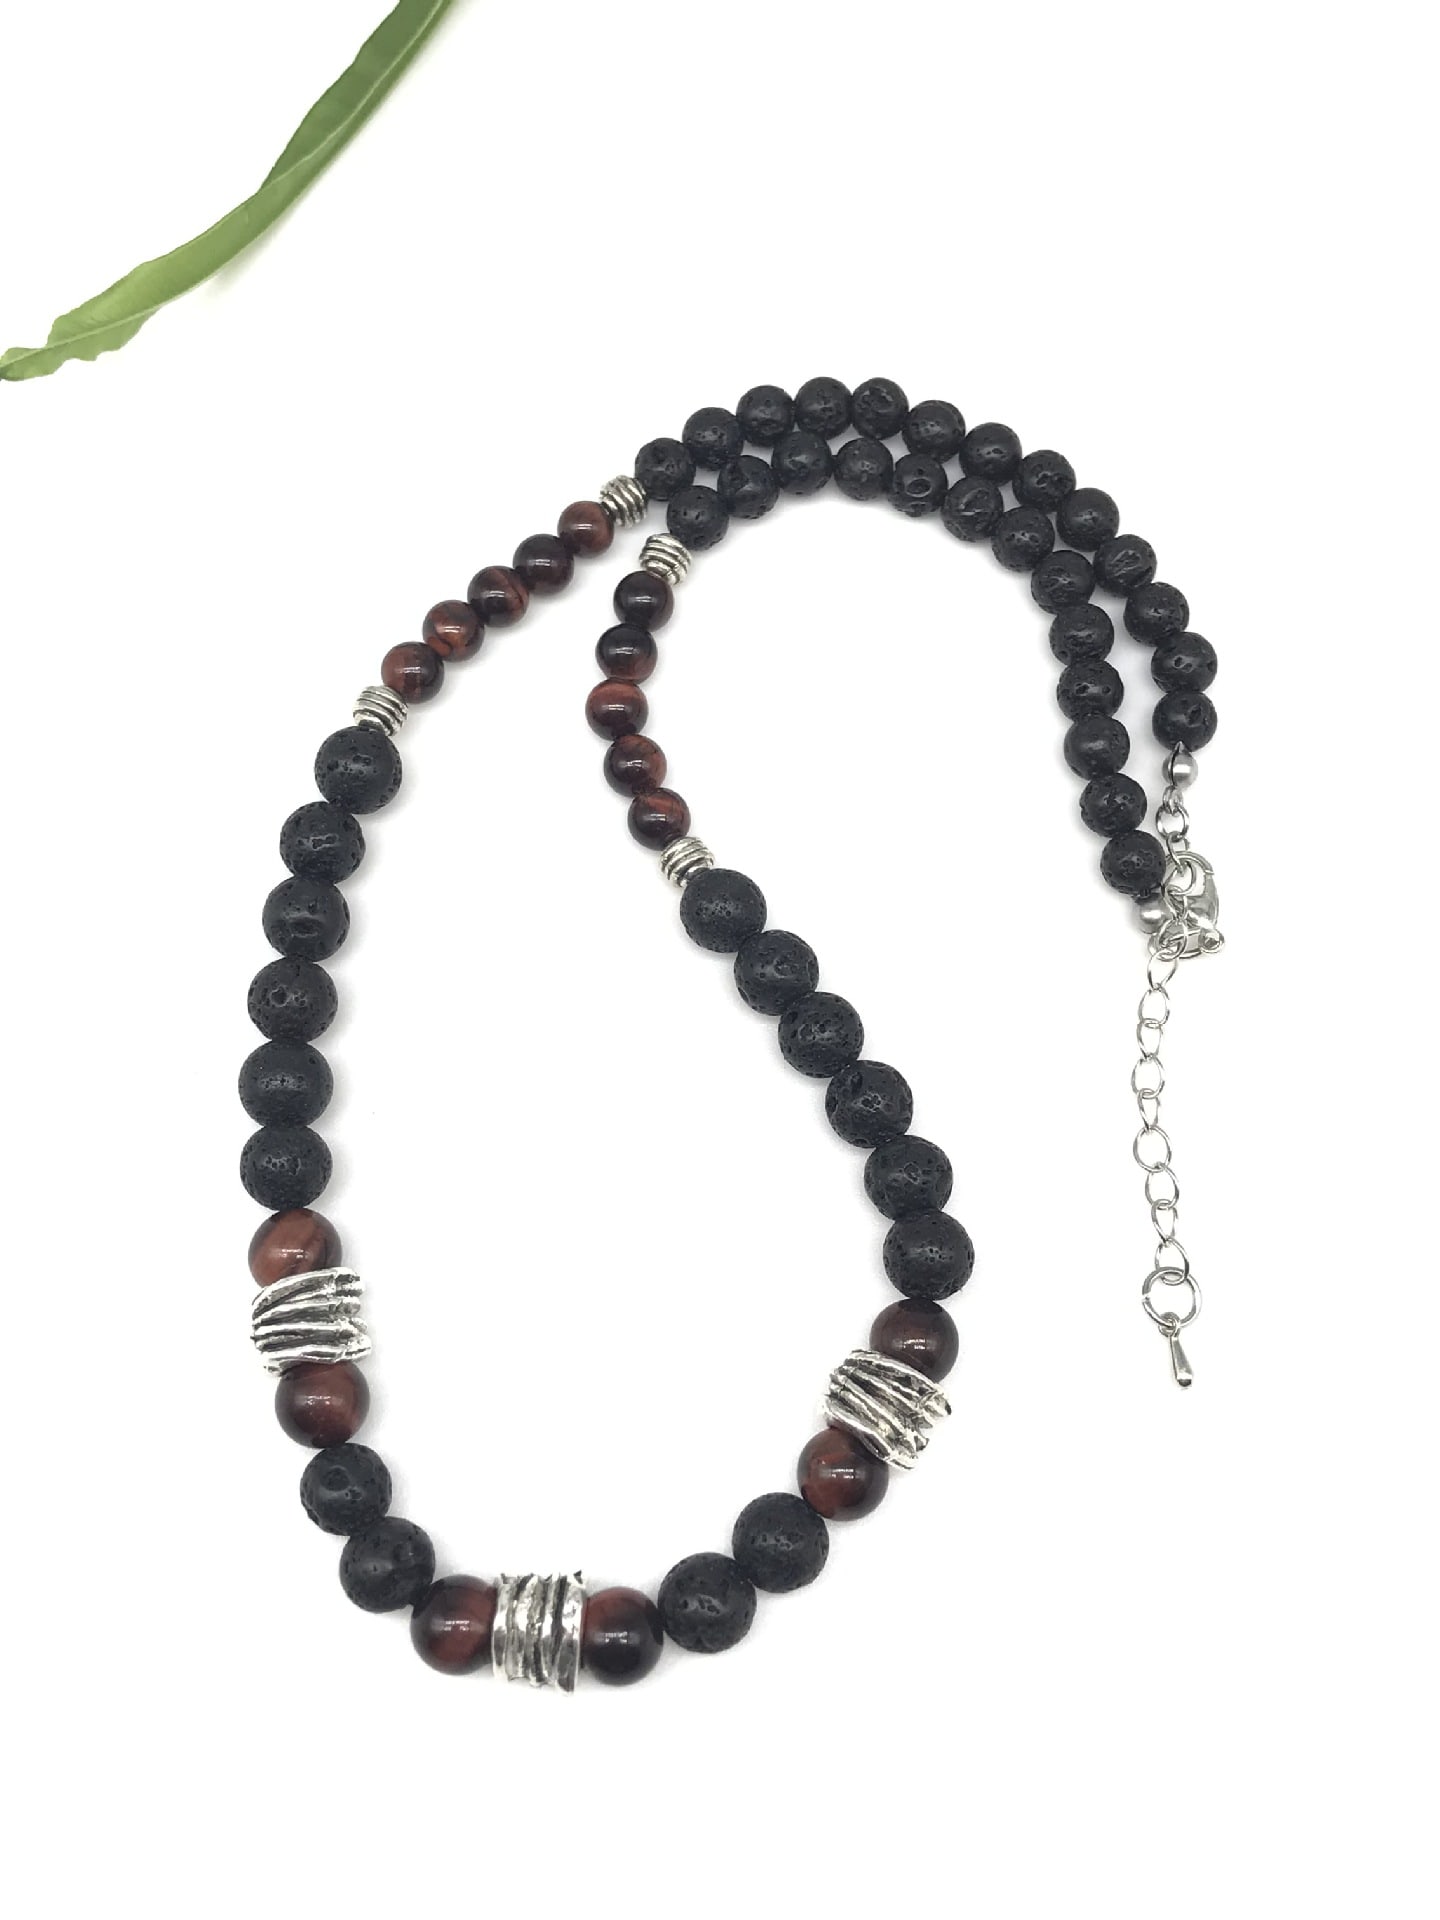 Stainless Steel Mens Bead Necklace Natural Stone Necklaces Black